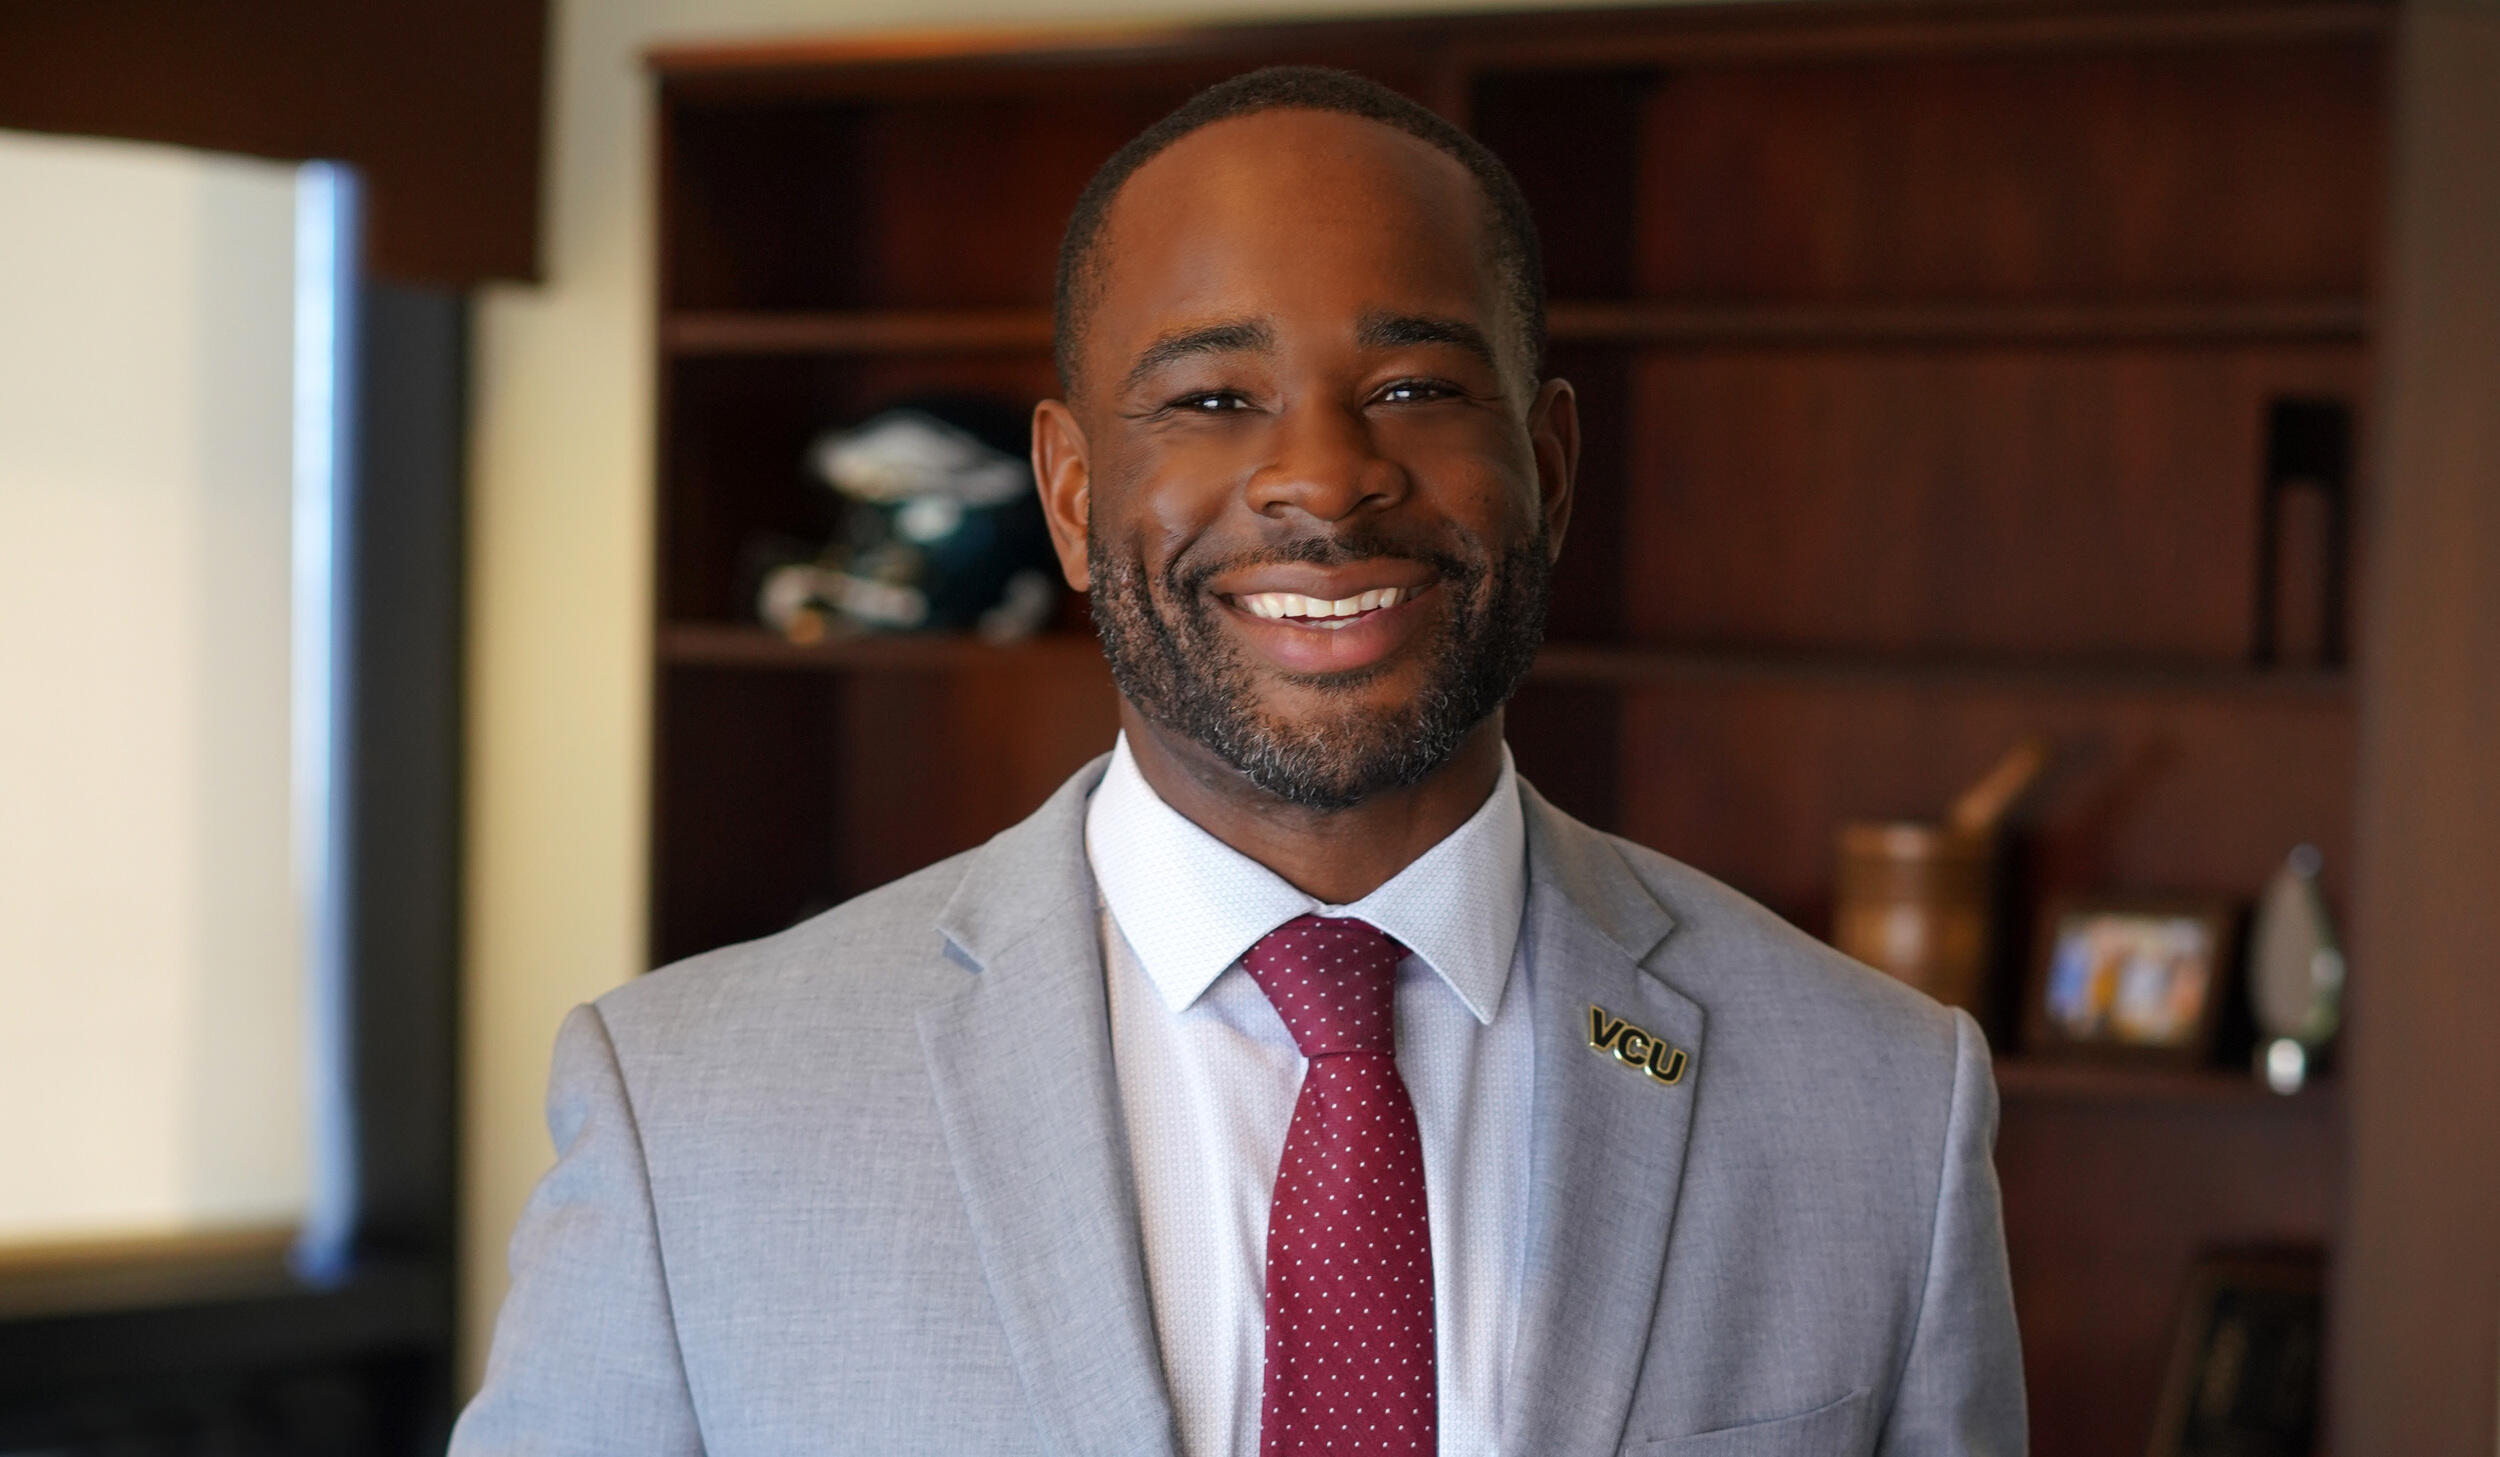 A portrait of a smiling man wearing a light gray sports jacket, white button up shirt, and burgundy tie. On his lapel is a pin that says \"VCU\". 